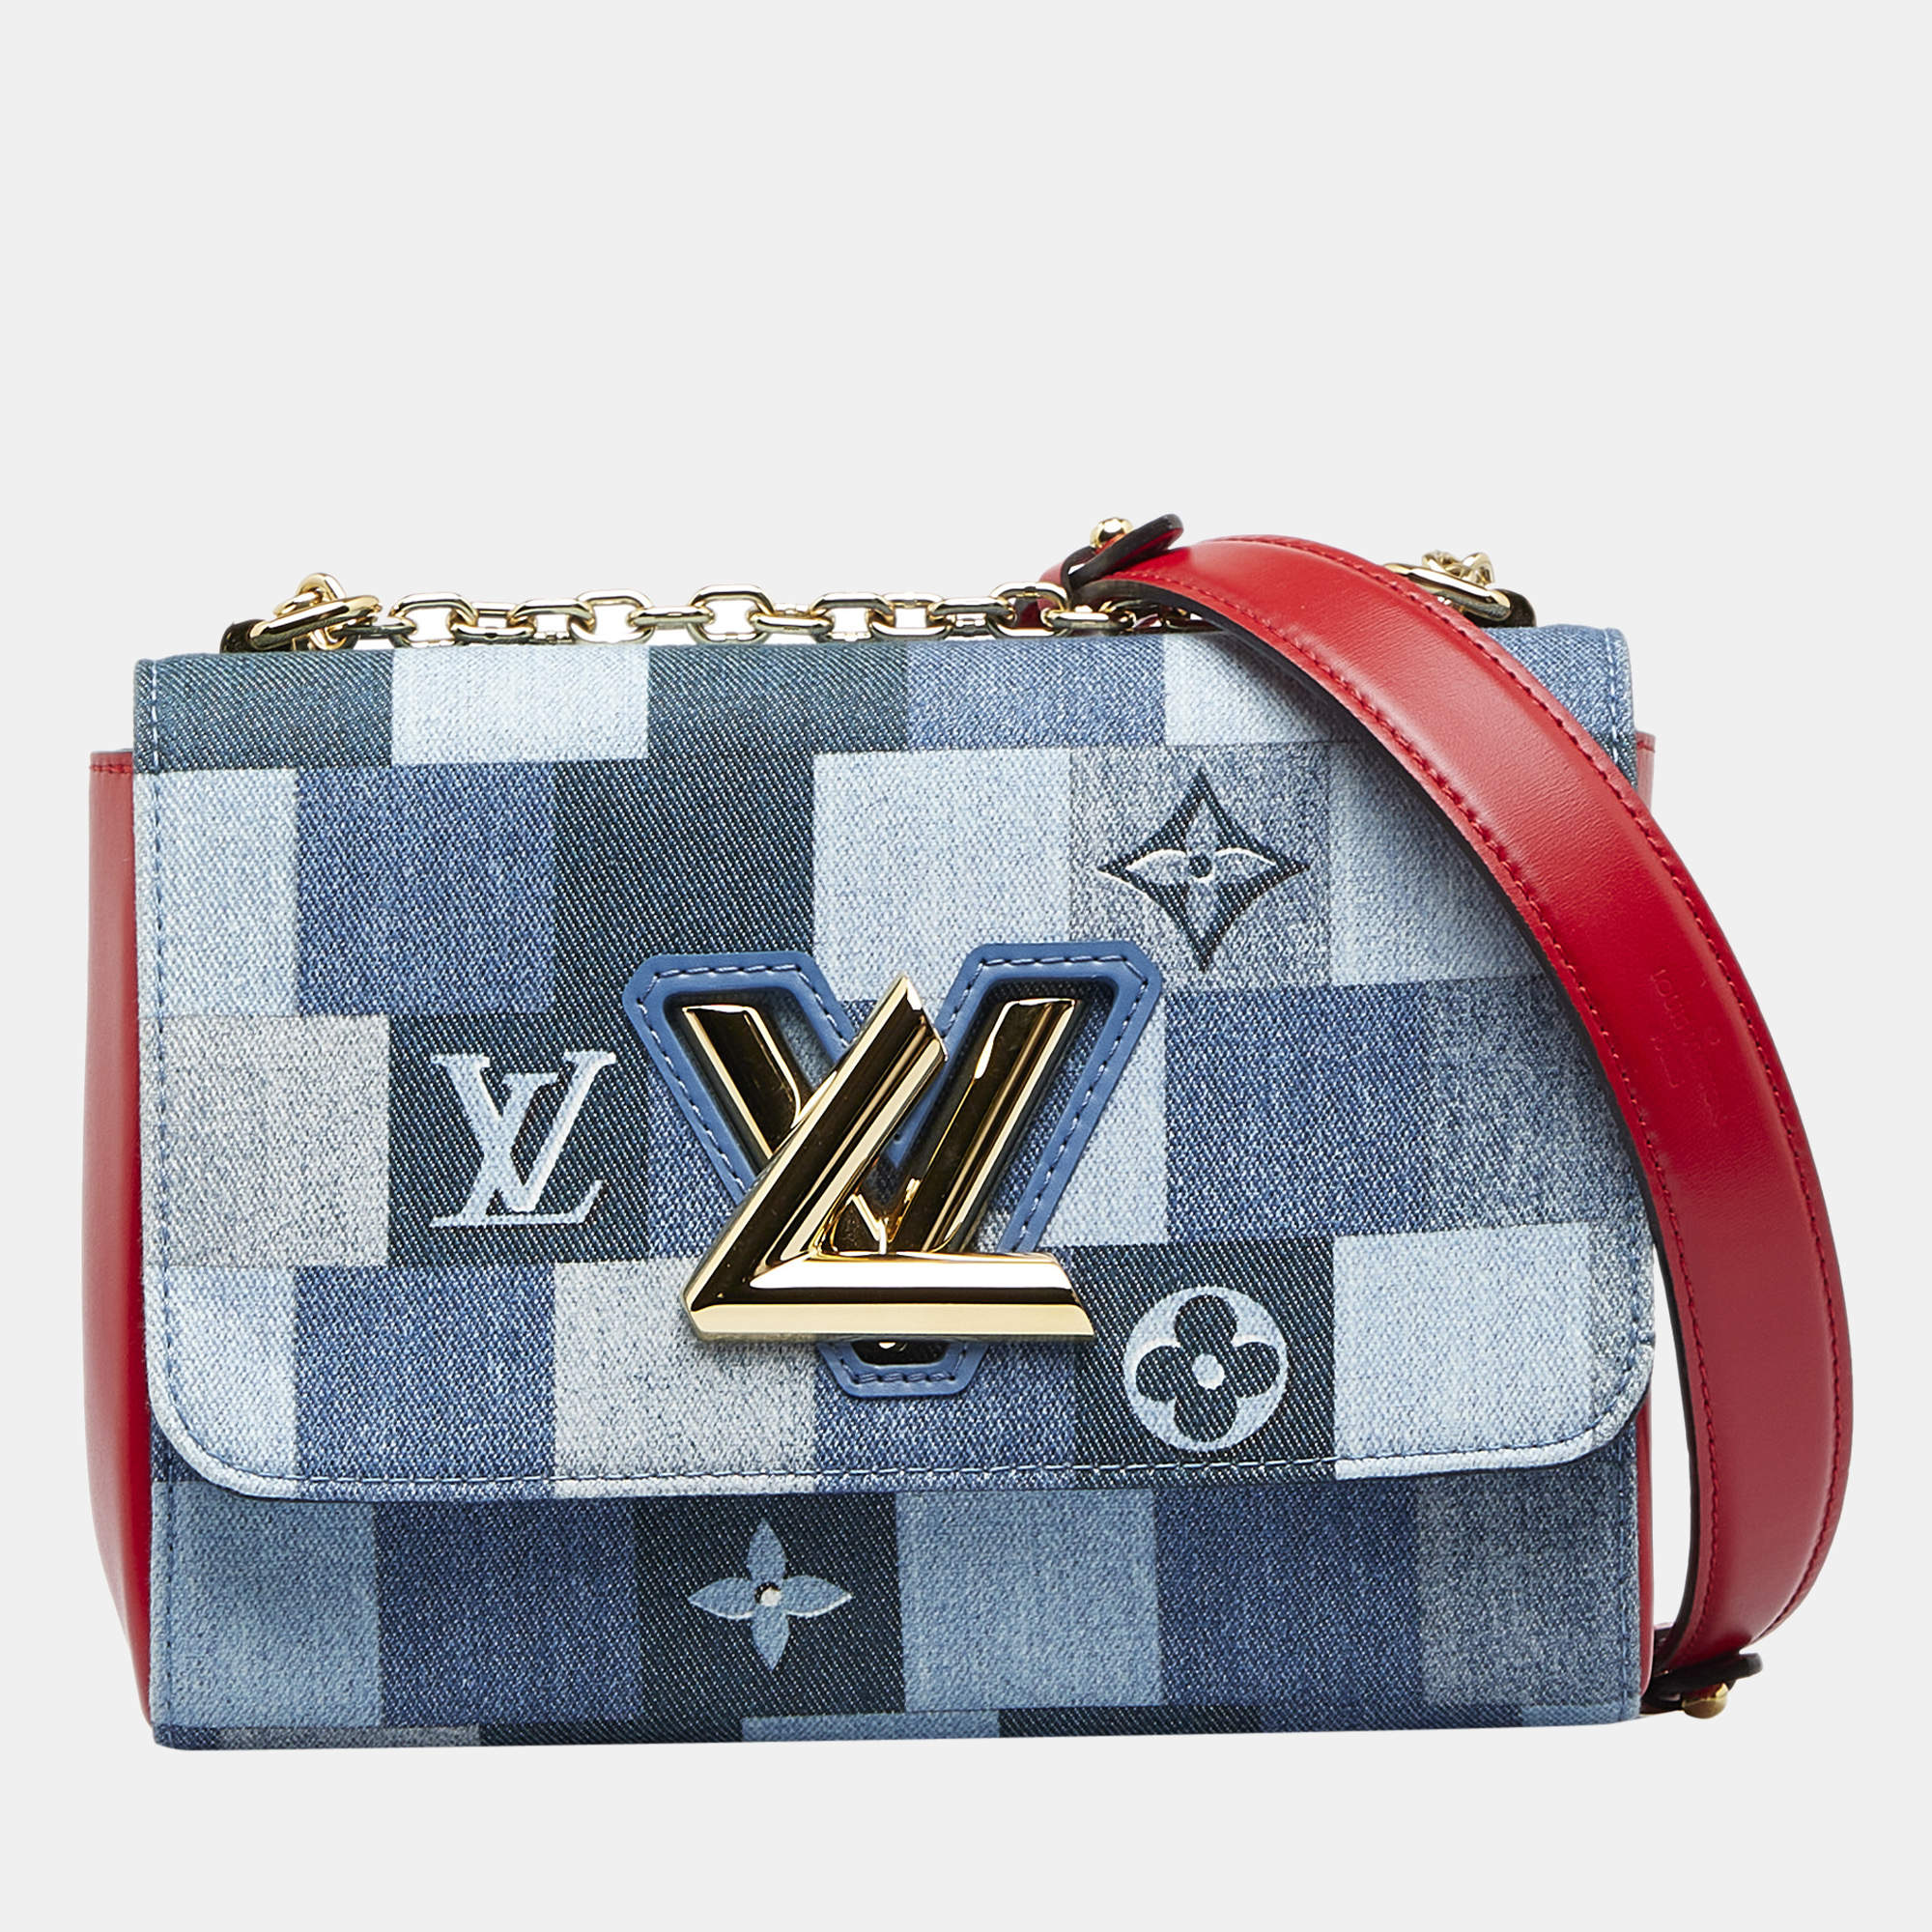 A Louis Vuitton pochette twist leather Patchwork bag. Made in